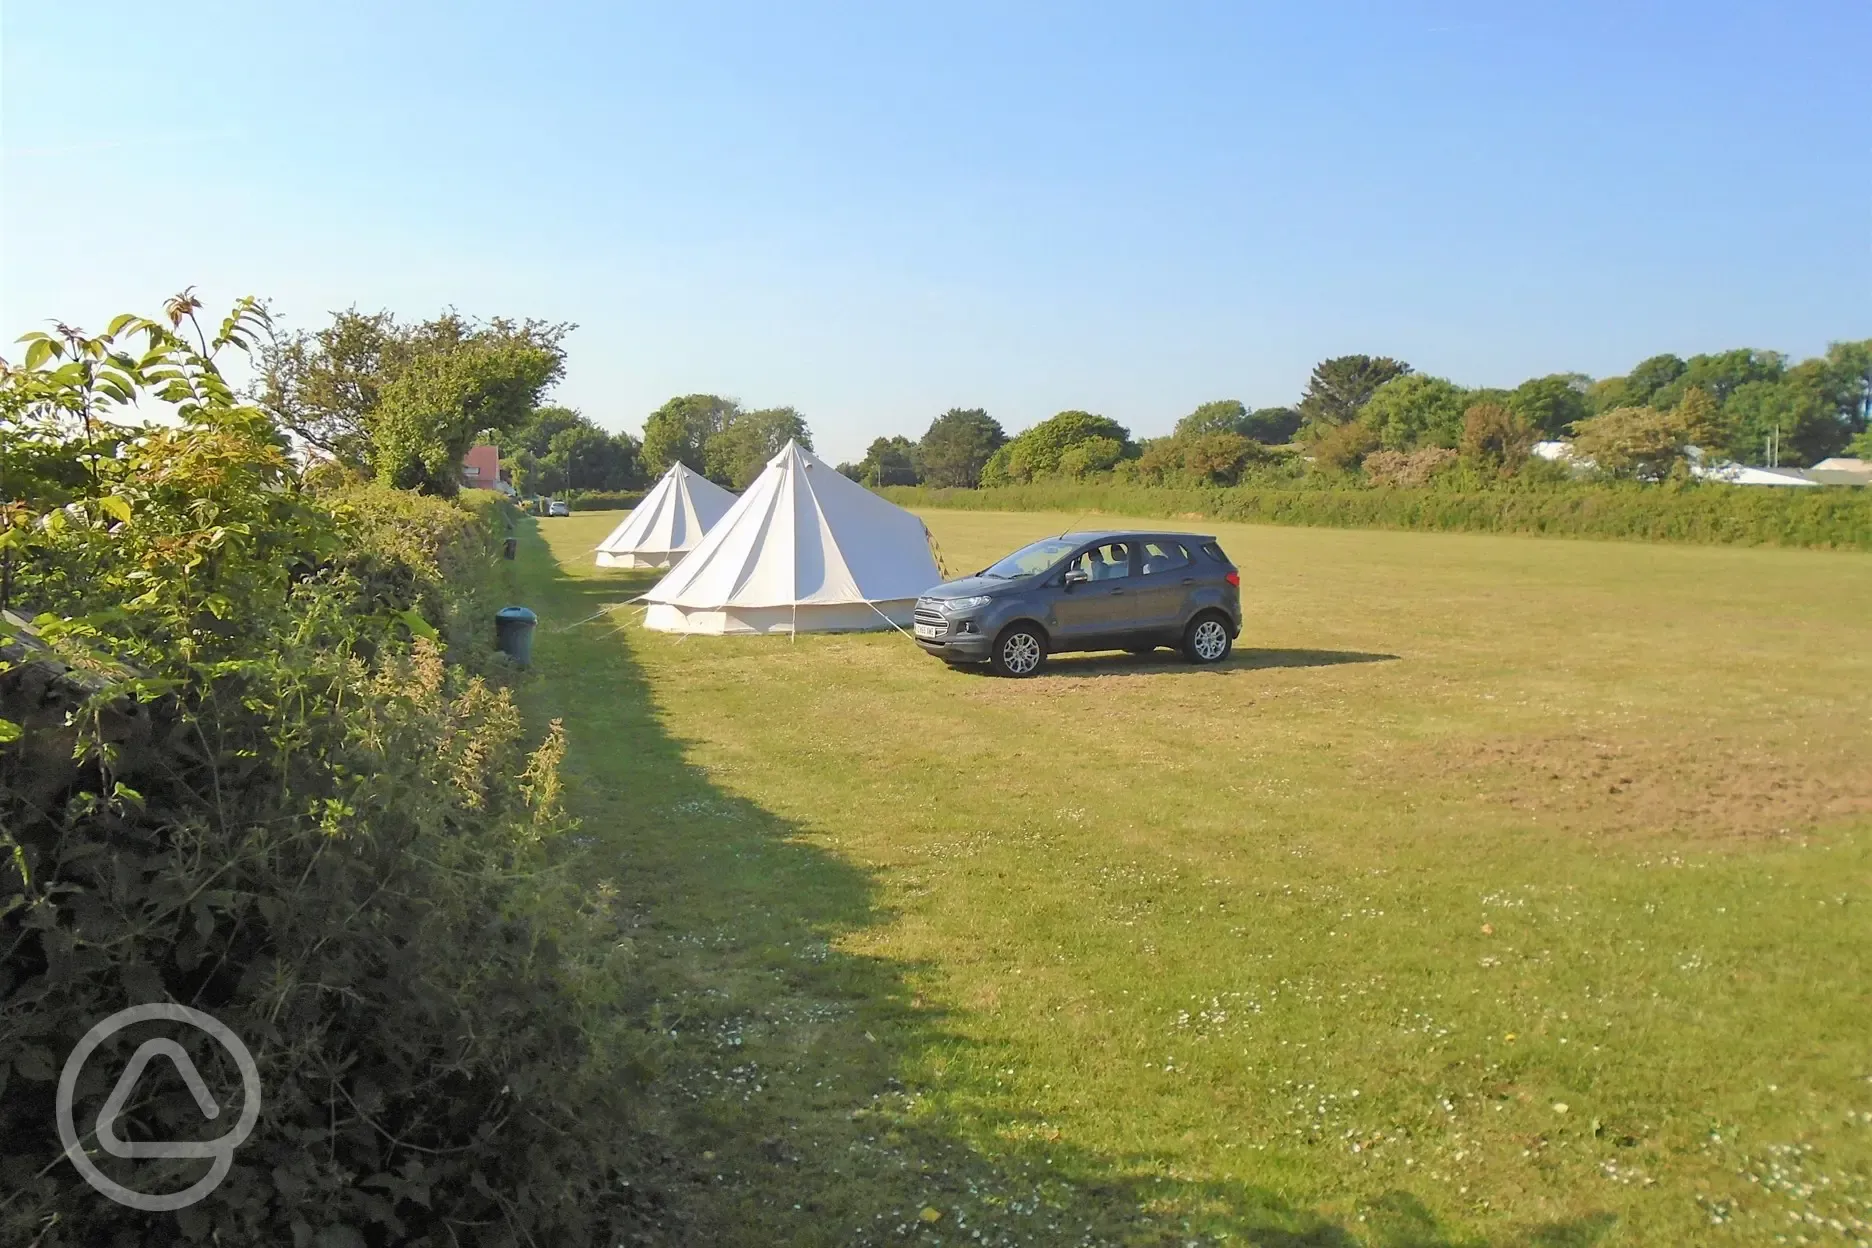 Non electric grass motorhome pitches